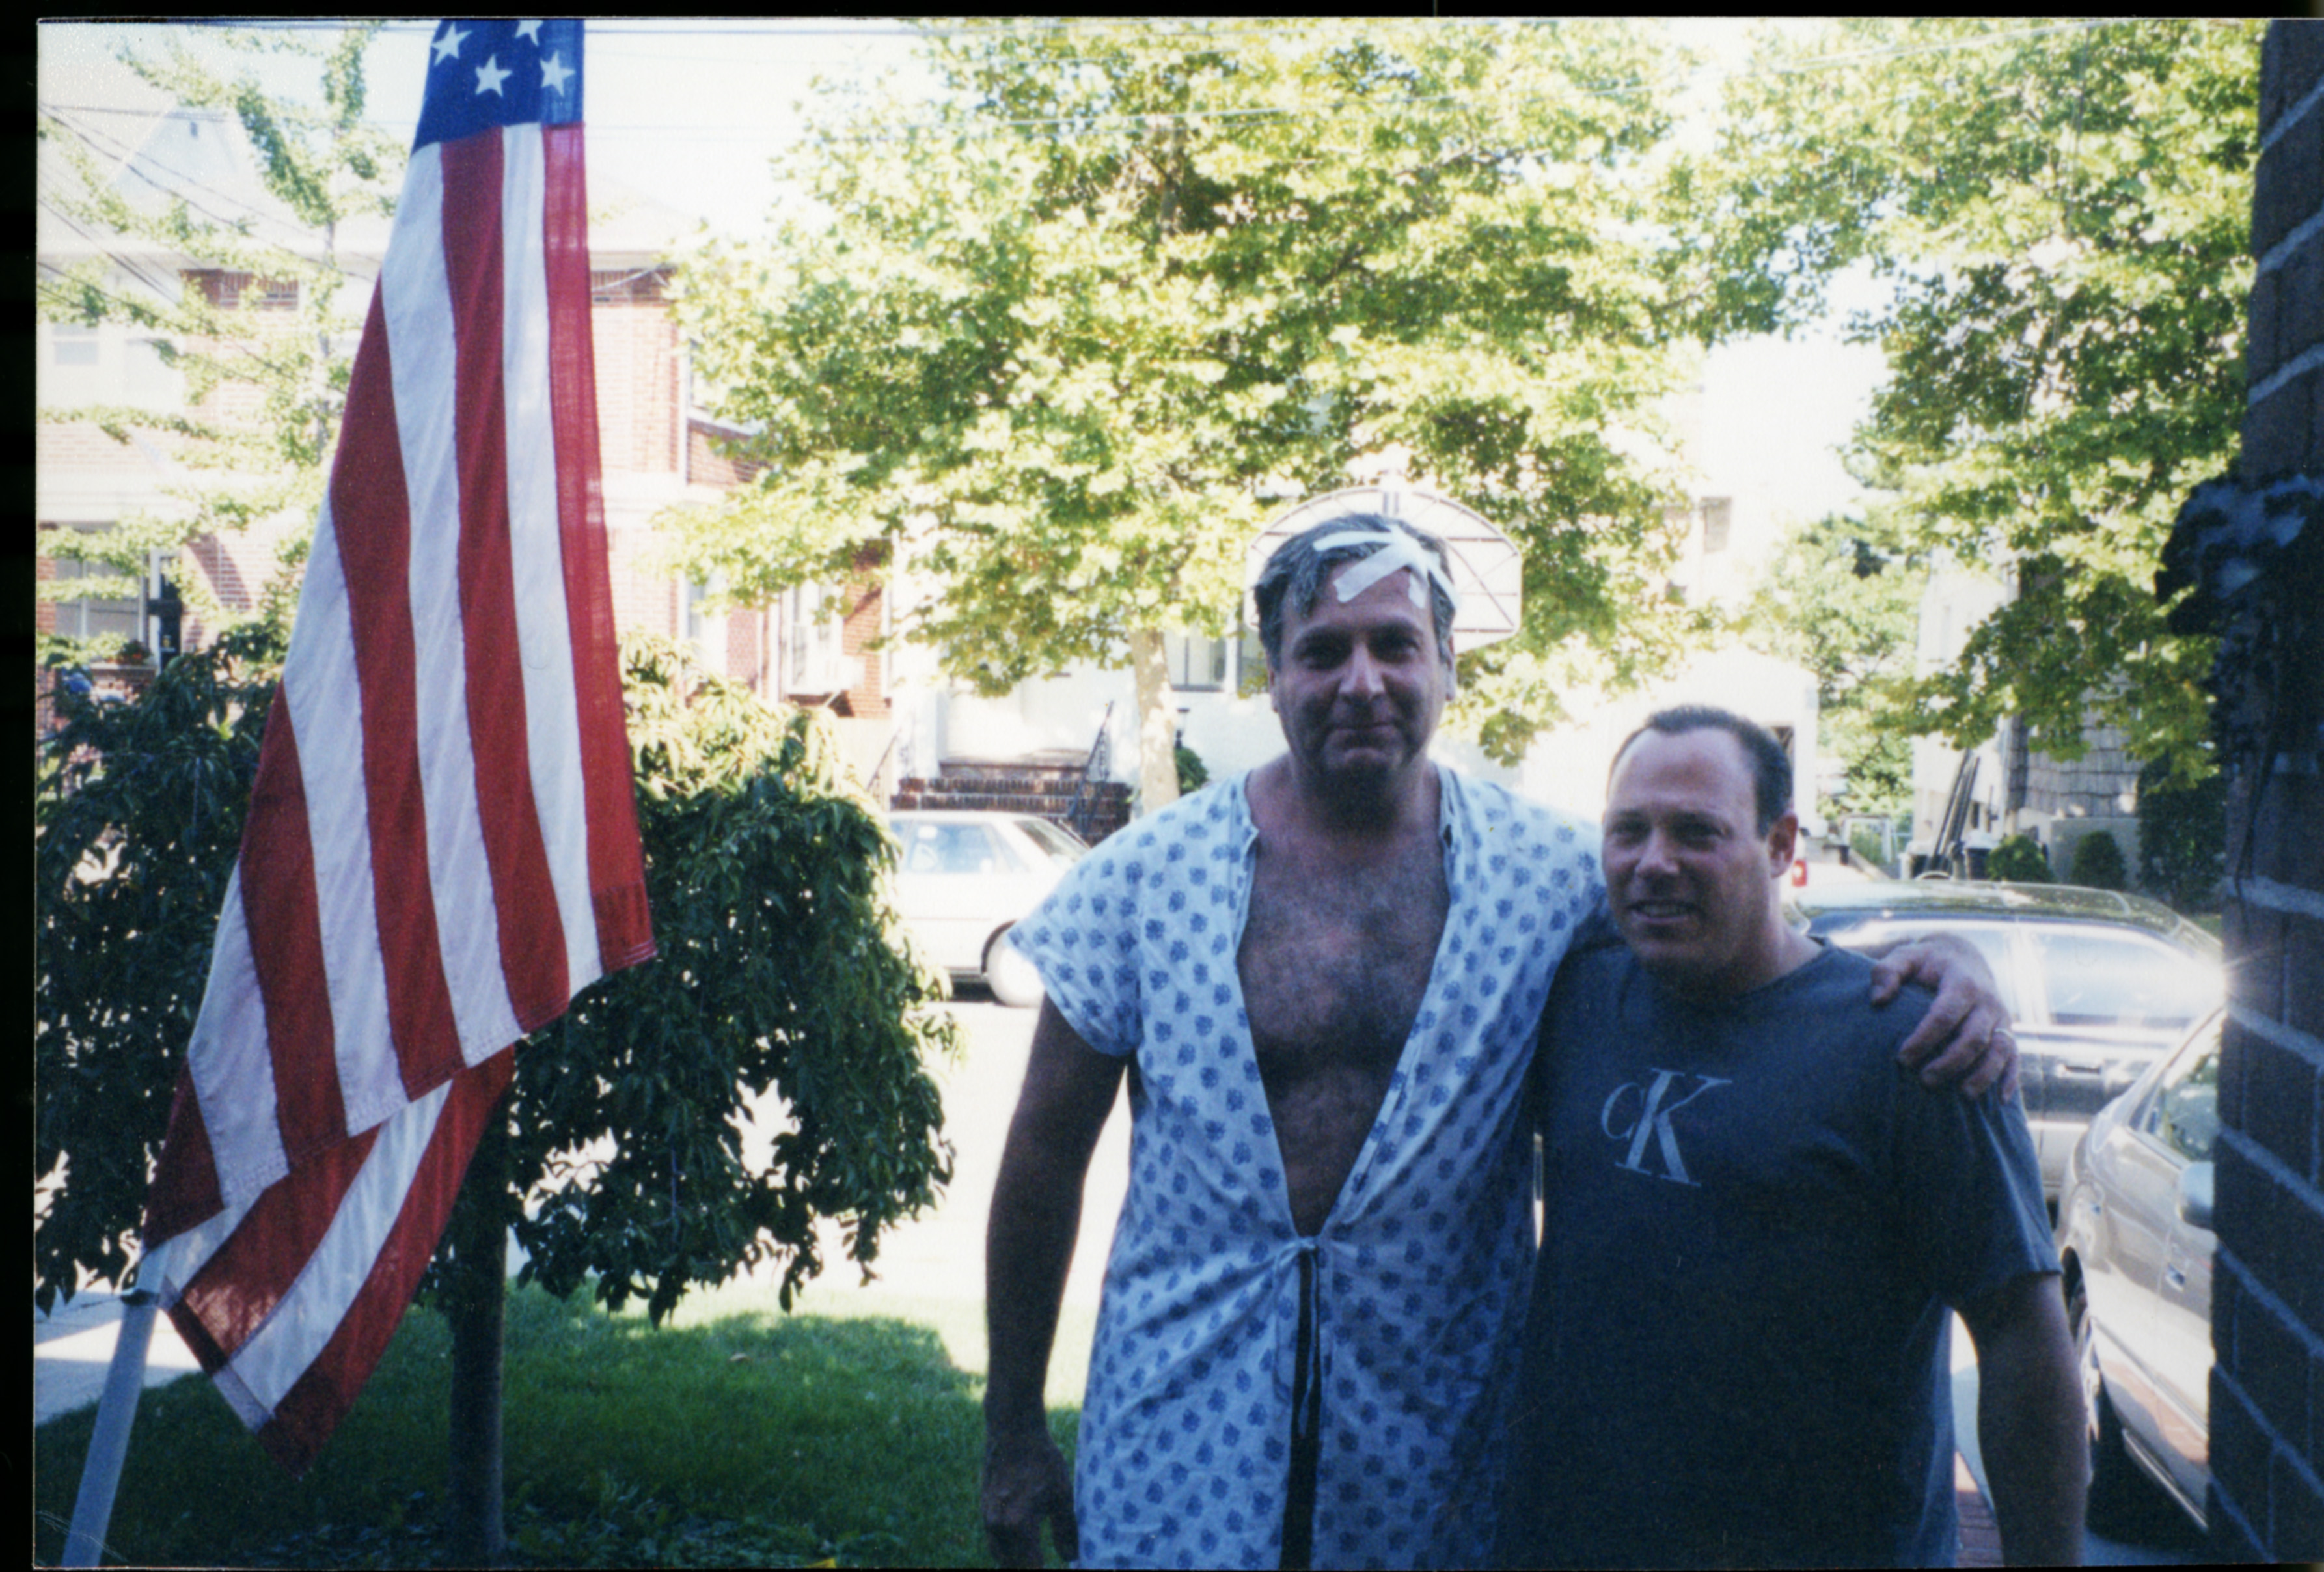 Survivor Richard Eichen embraces the stranger who drove him home on September 11, 2001, in the front yard of a home on a sunny day. An American flag stands to the right of them.